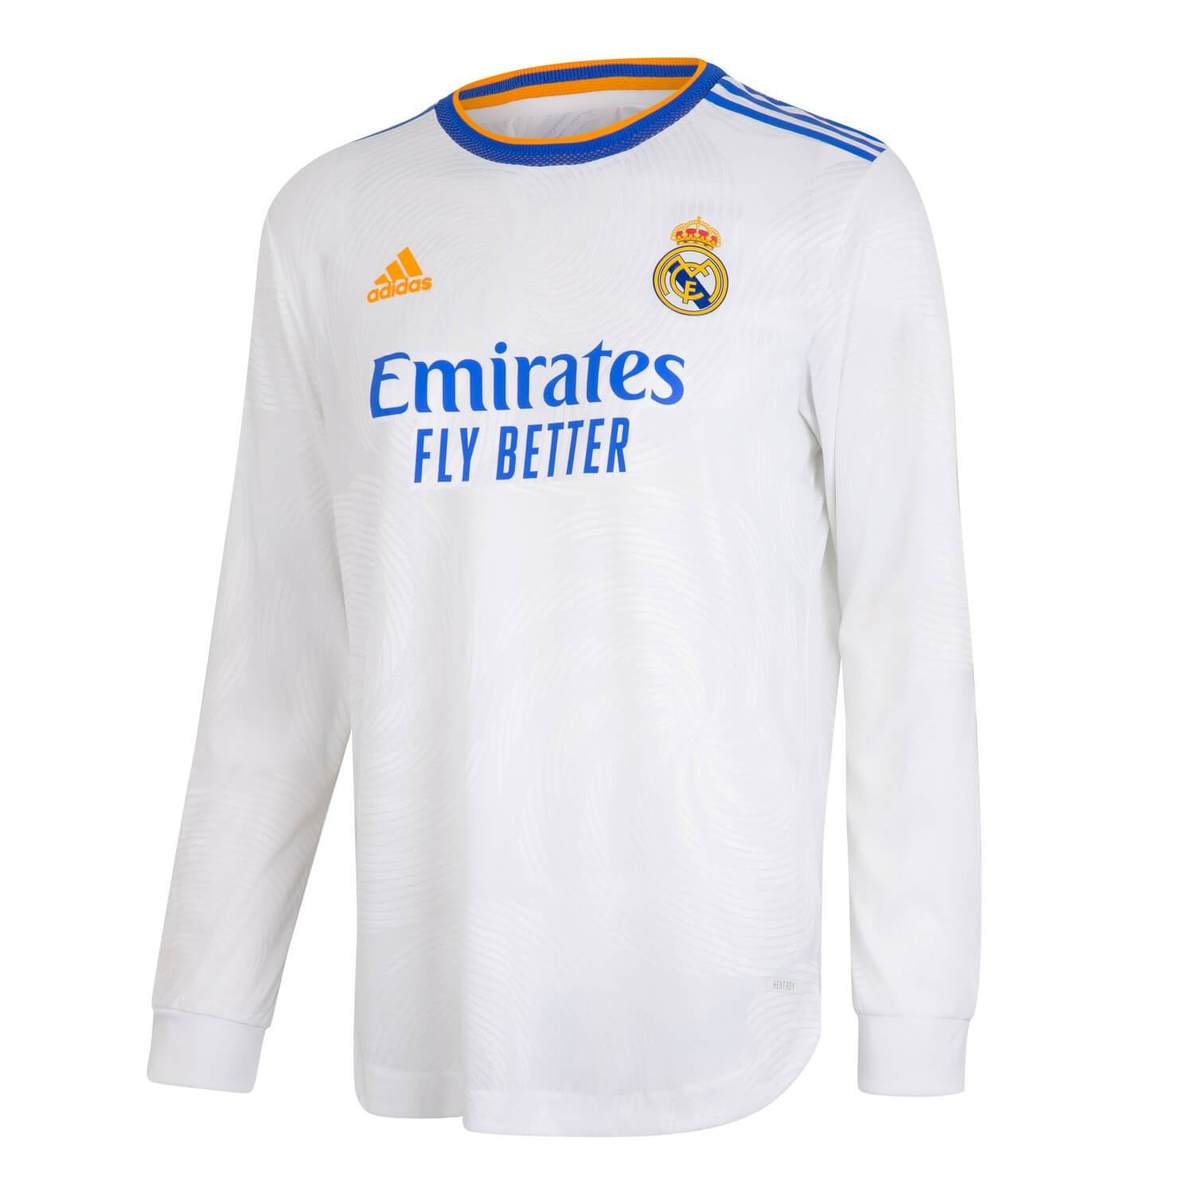 Adidas 2021-22 Real Madrid Home Authentic Long-Sleeve Jersey - White-Blue-Orange (Front)